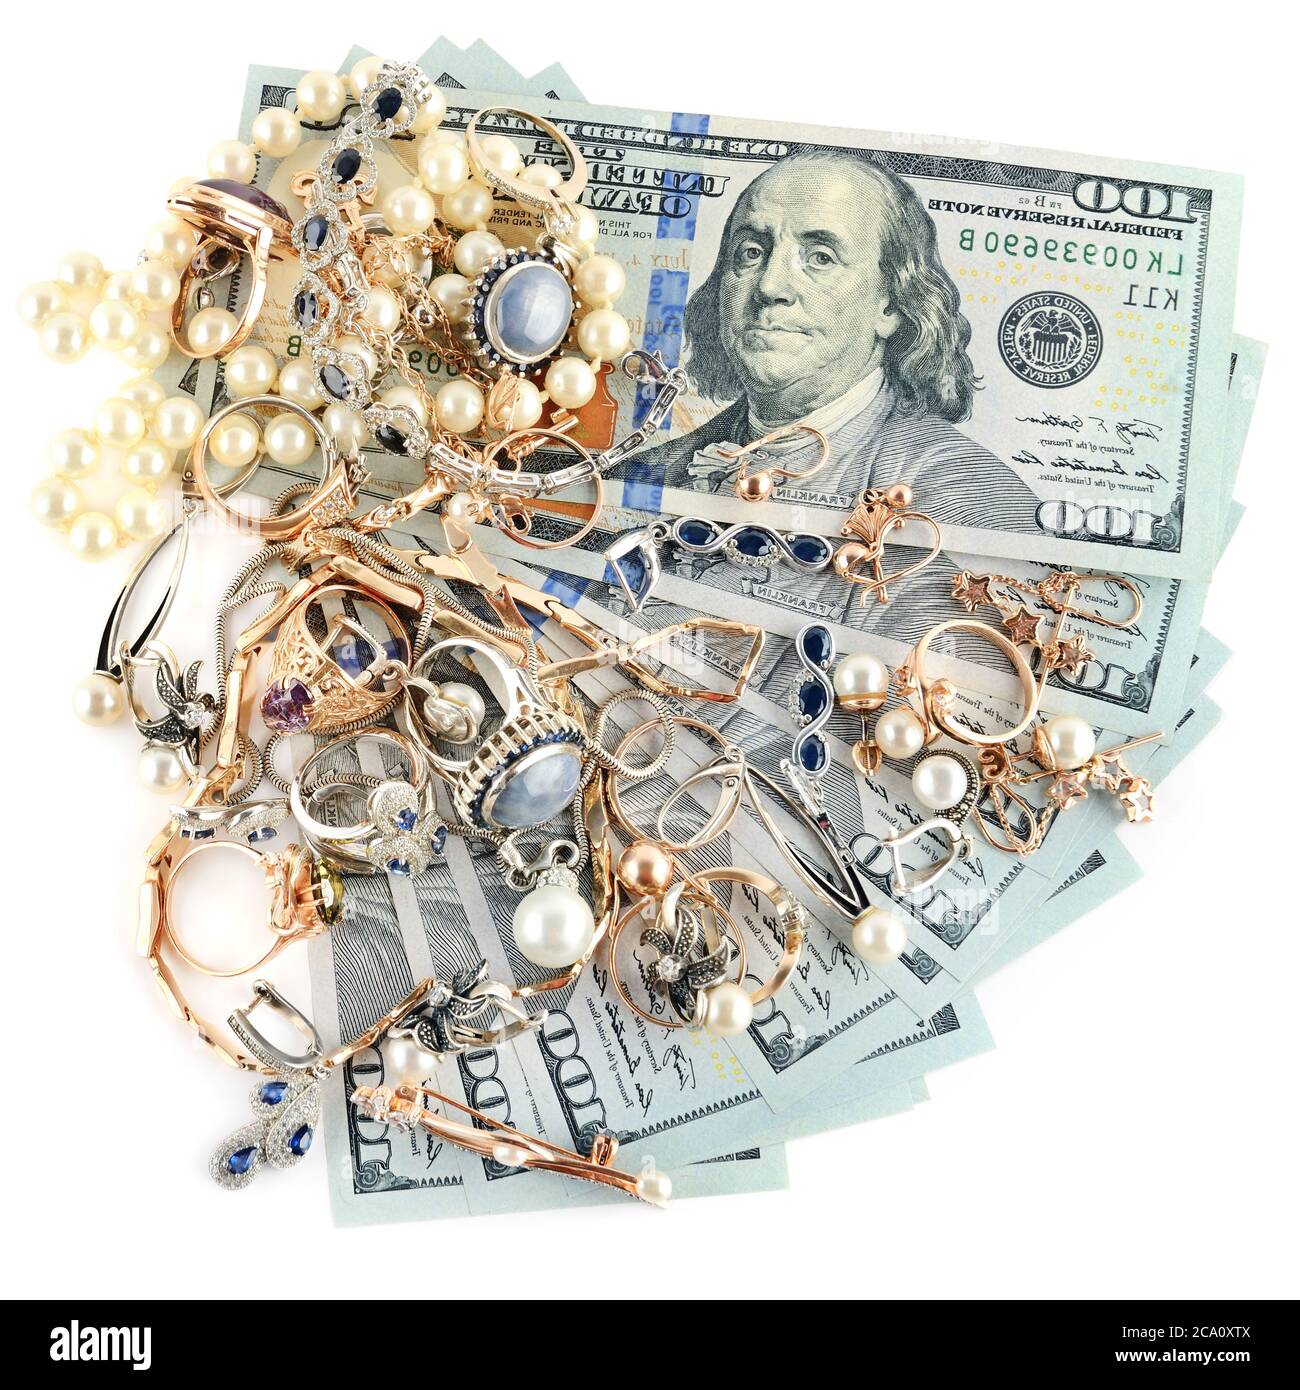 Man Buying Gold Jewellry Pawn Shop And Us Dollar Banknotes Stock Photo -  Download Image Now - iStock